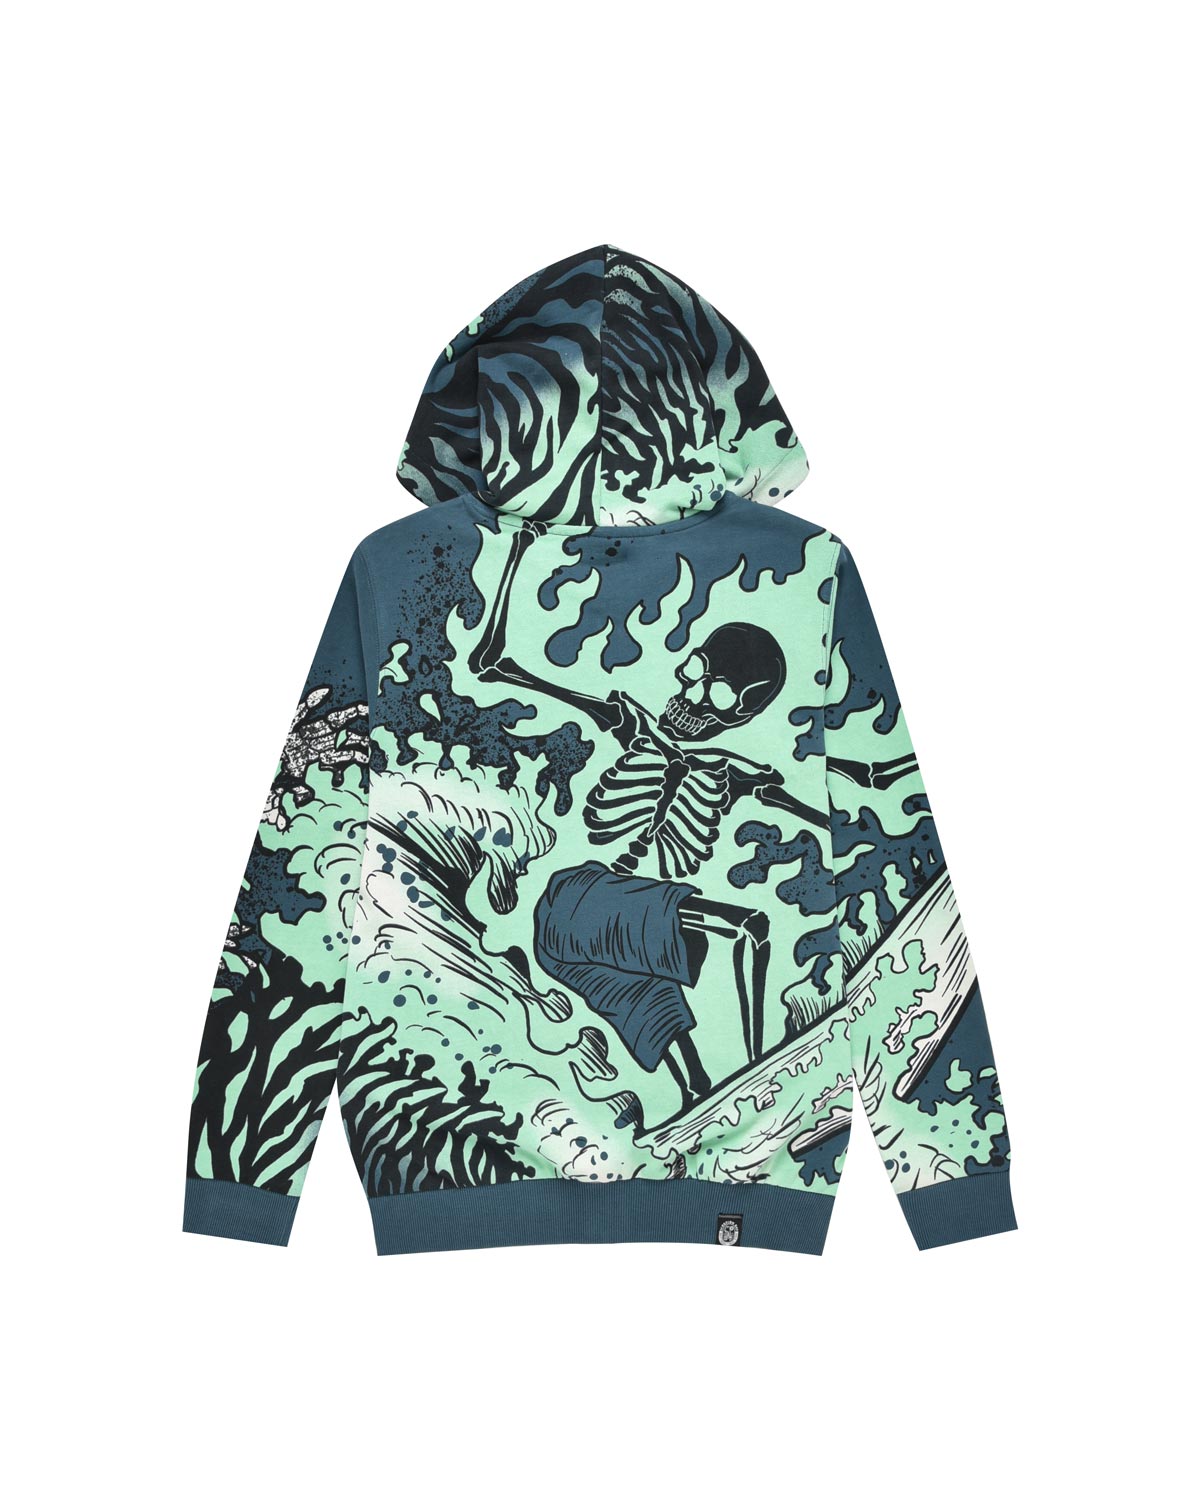 Kid | "Hell Of A Surfer" All-Over Print Sweatshirt 100% Petrol Color Cotton